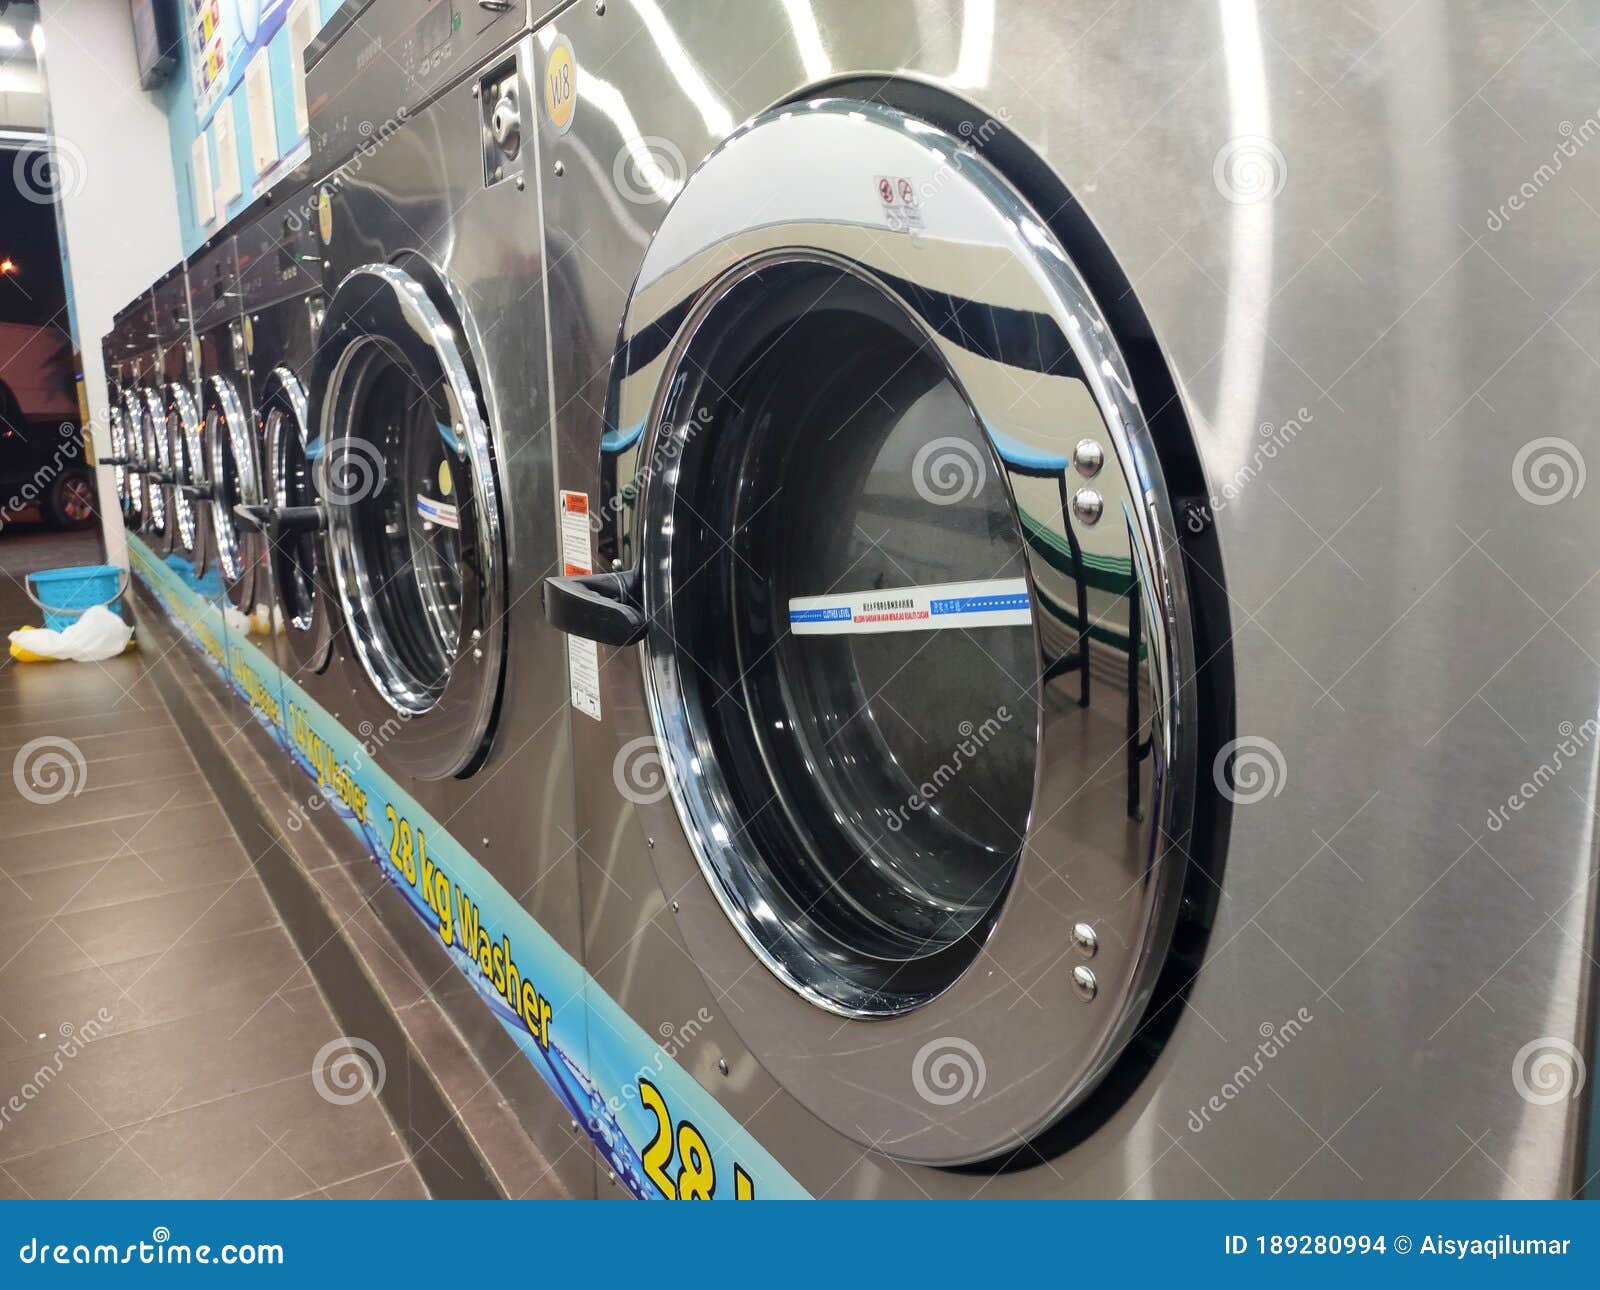 laundry-machines-outlet-provides-self-service-laundry-drying-machines-open-hours-kuala-lumpur-malaysia-march-laundry-189280994.jpg